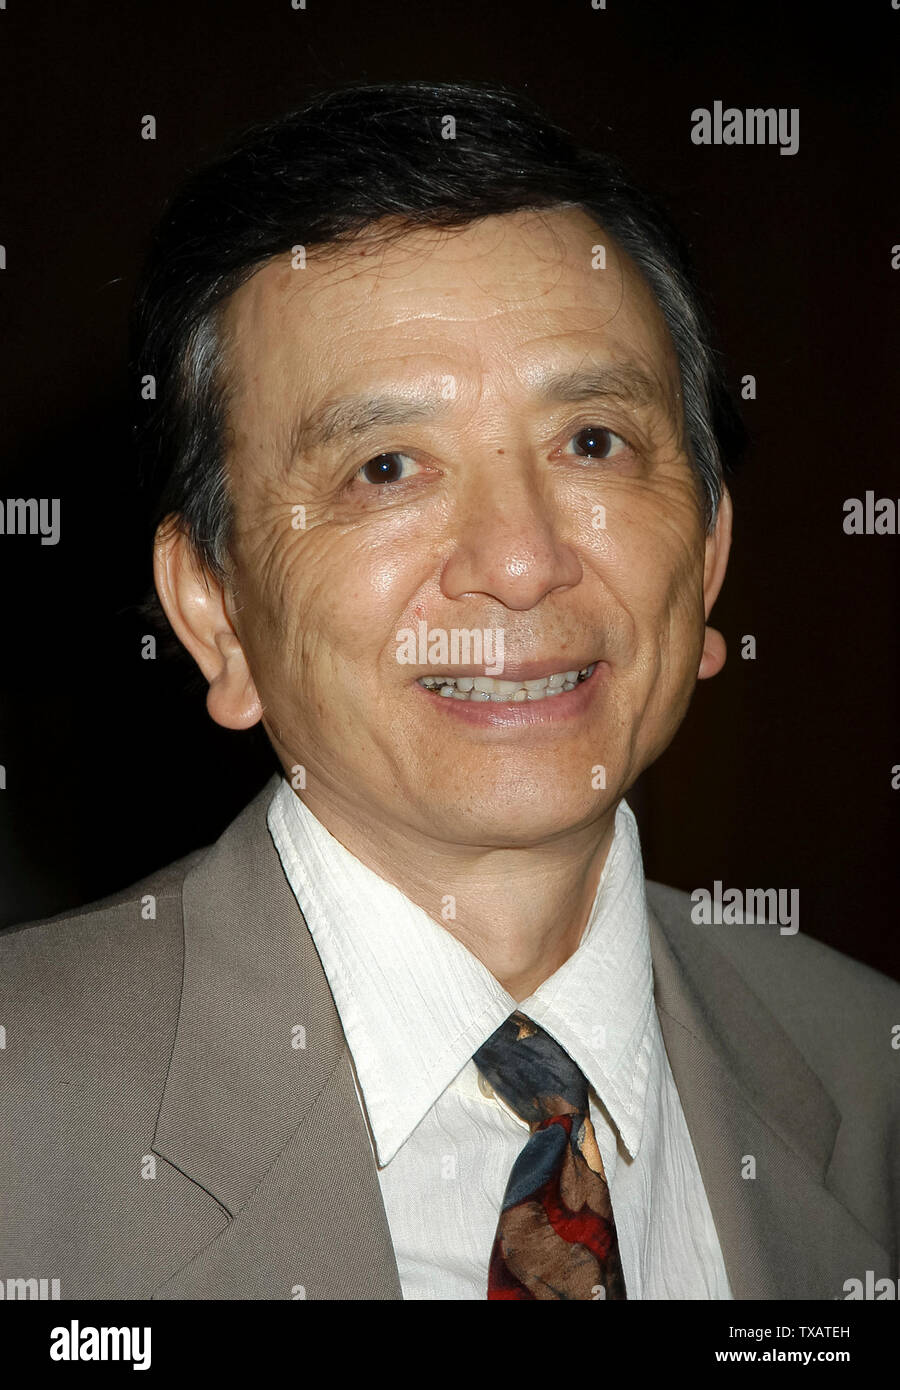 James Hong at the VCFilmFest 2004, The 20th LA Asian Pacific Film Festival - Opening Night Gala at the Directors Guild of America in West Hollywood, CA. The event took place on Thursday, April 29, 2004. Photo by: SBM / PictureLux  -  File Reference # 33790-4160SMBPLX Stock Photo